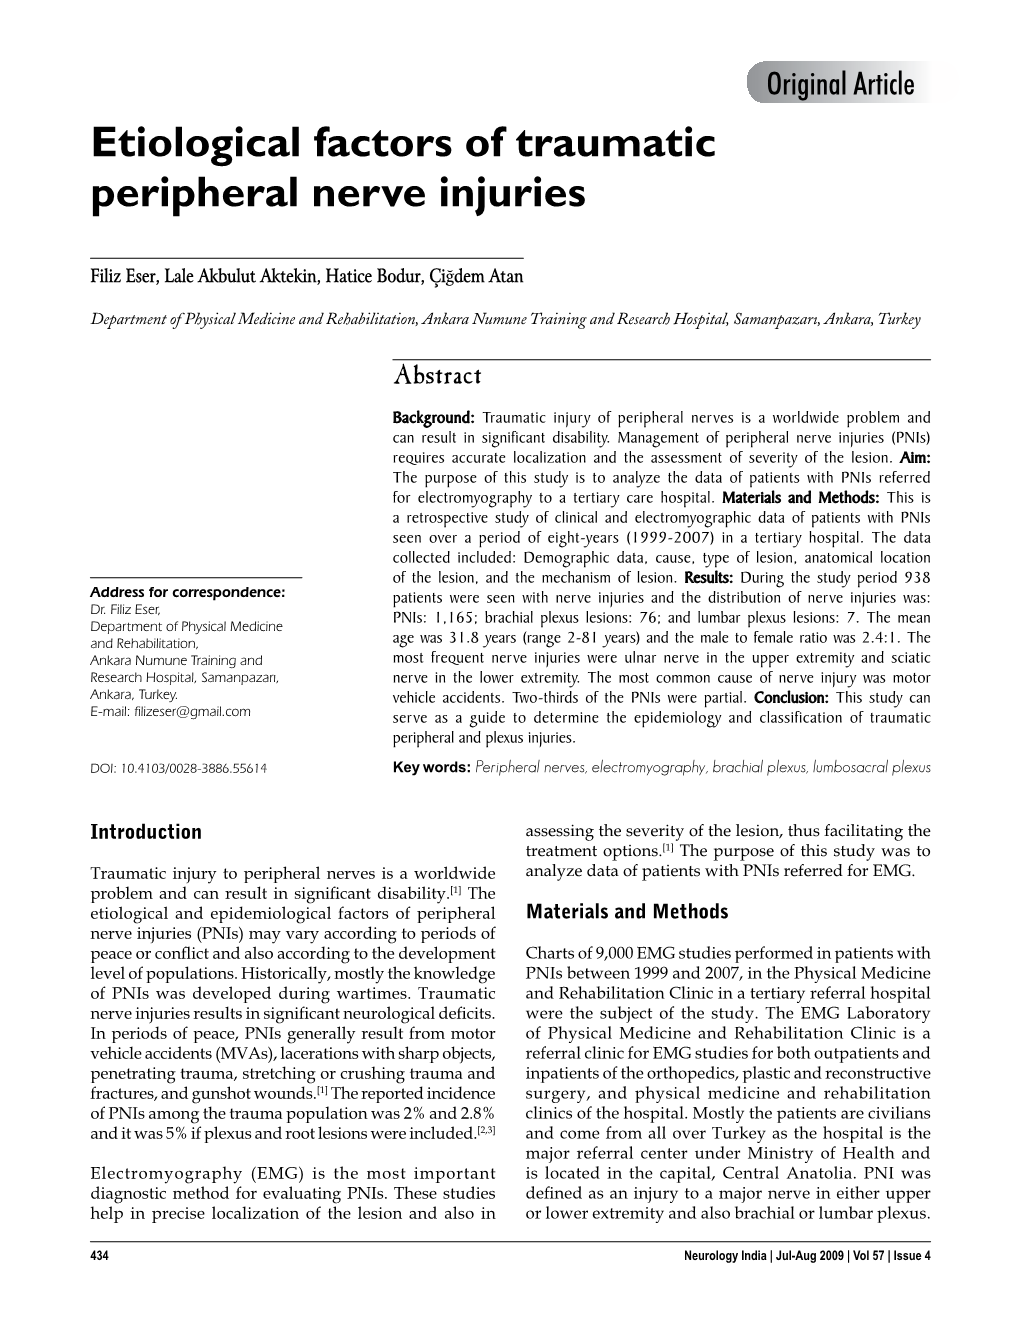 Etiological Factors of Traumatic Peripheral Nerve Injuries